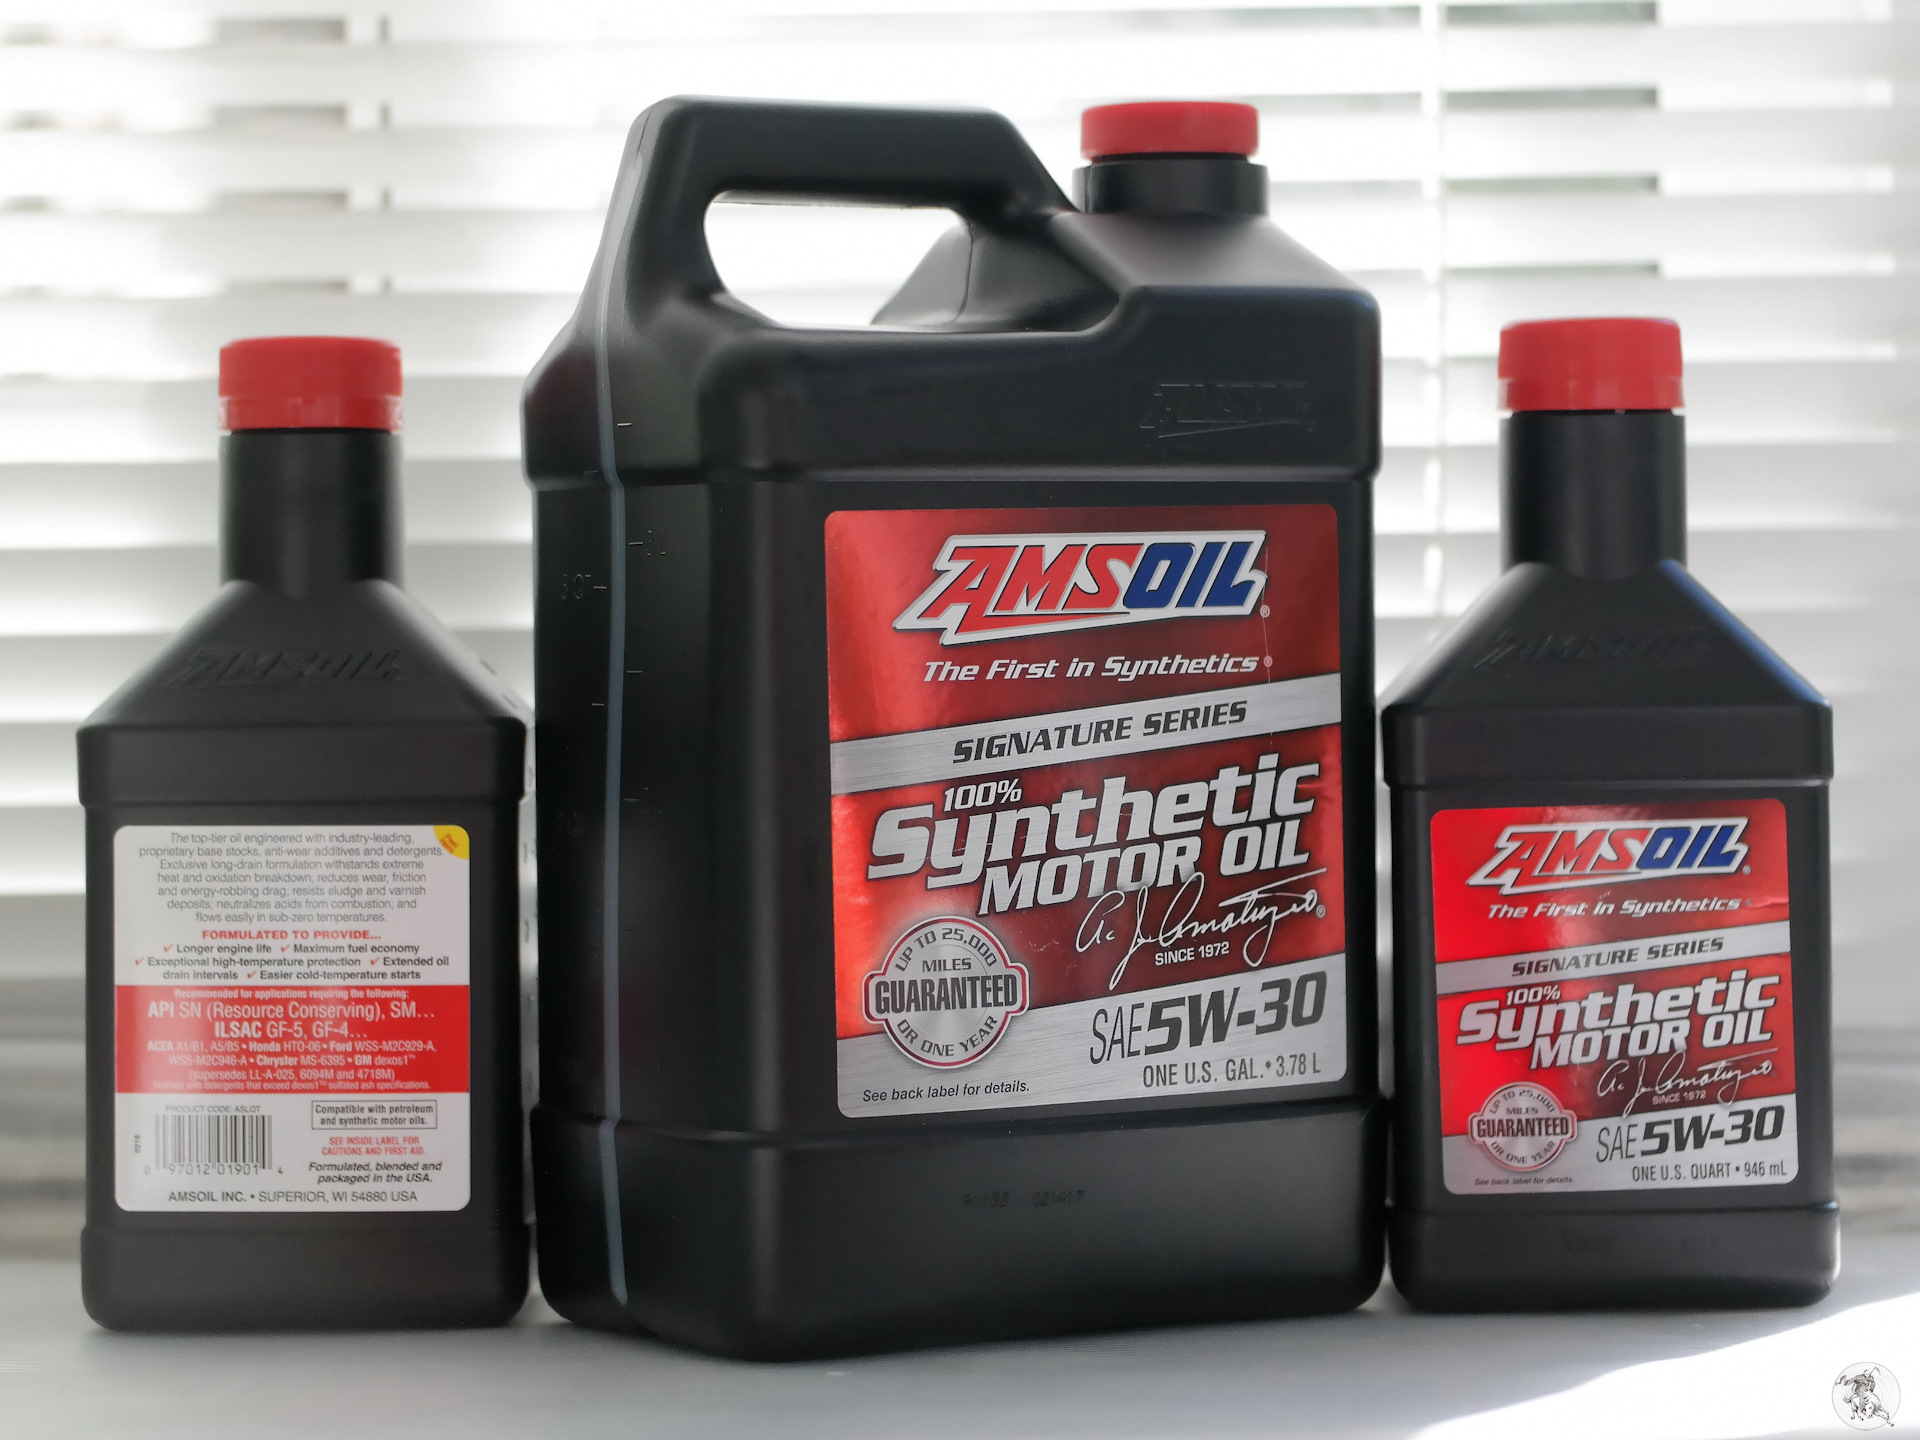 Signature series synthetic. AMSOIL SS 5w30. AMSOIL Signature Series 5w-30. Моторное масло AMSOIL 5w30. AMSOIL Signature Series 100% Synthetic 5w30 (asl1g),.